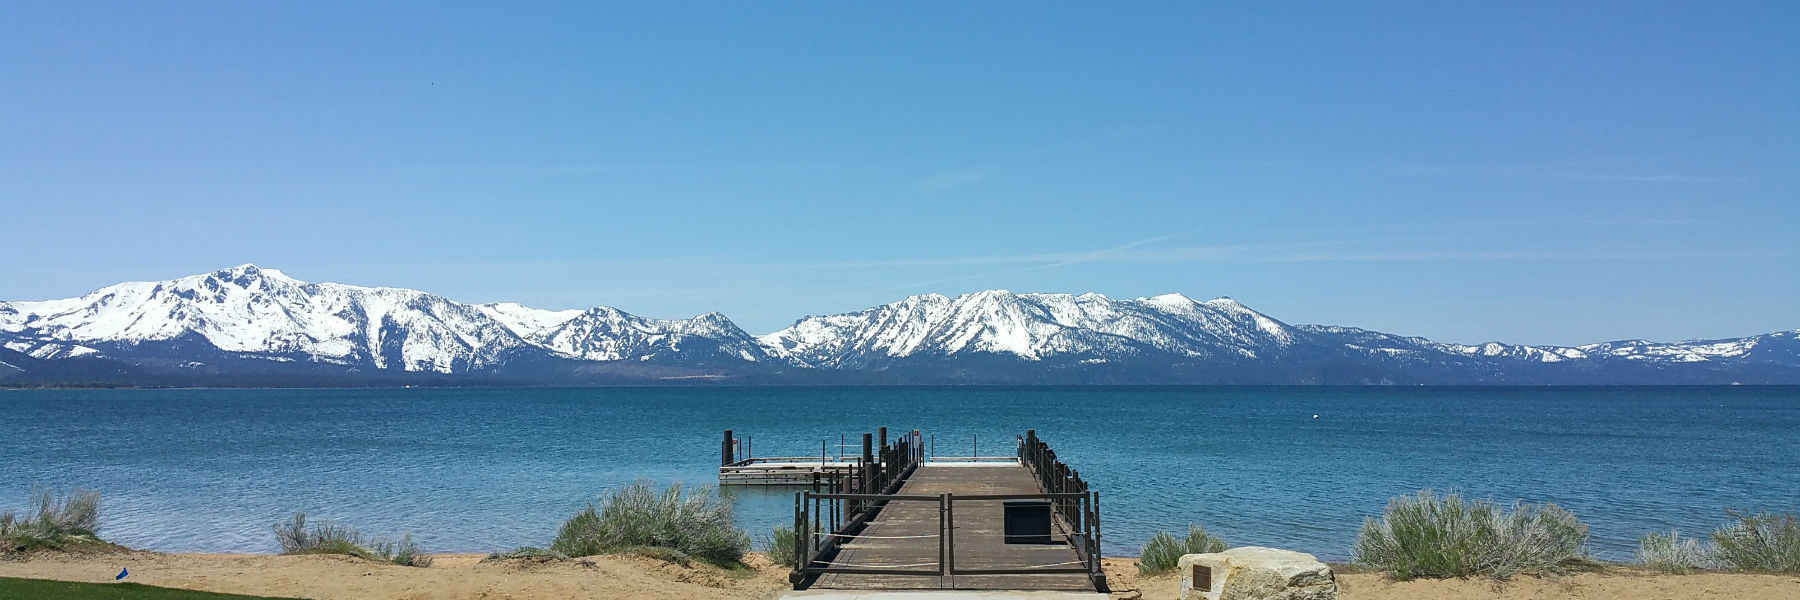 Dock in lake in front of snowy mountains